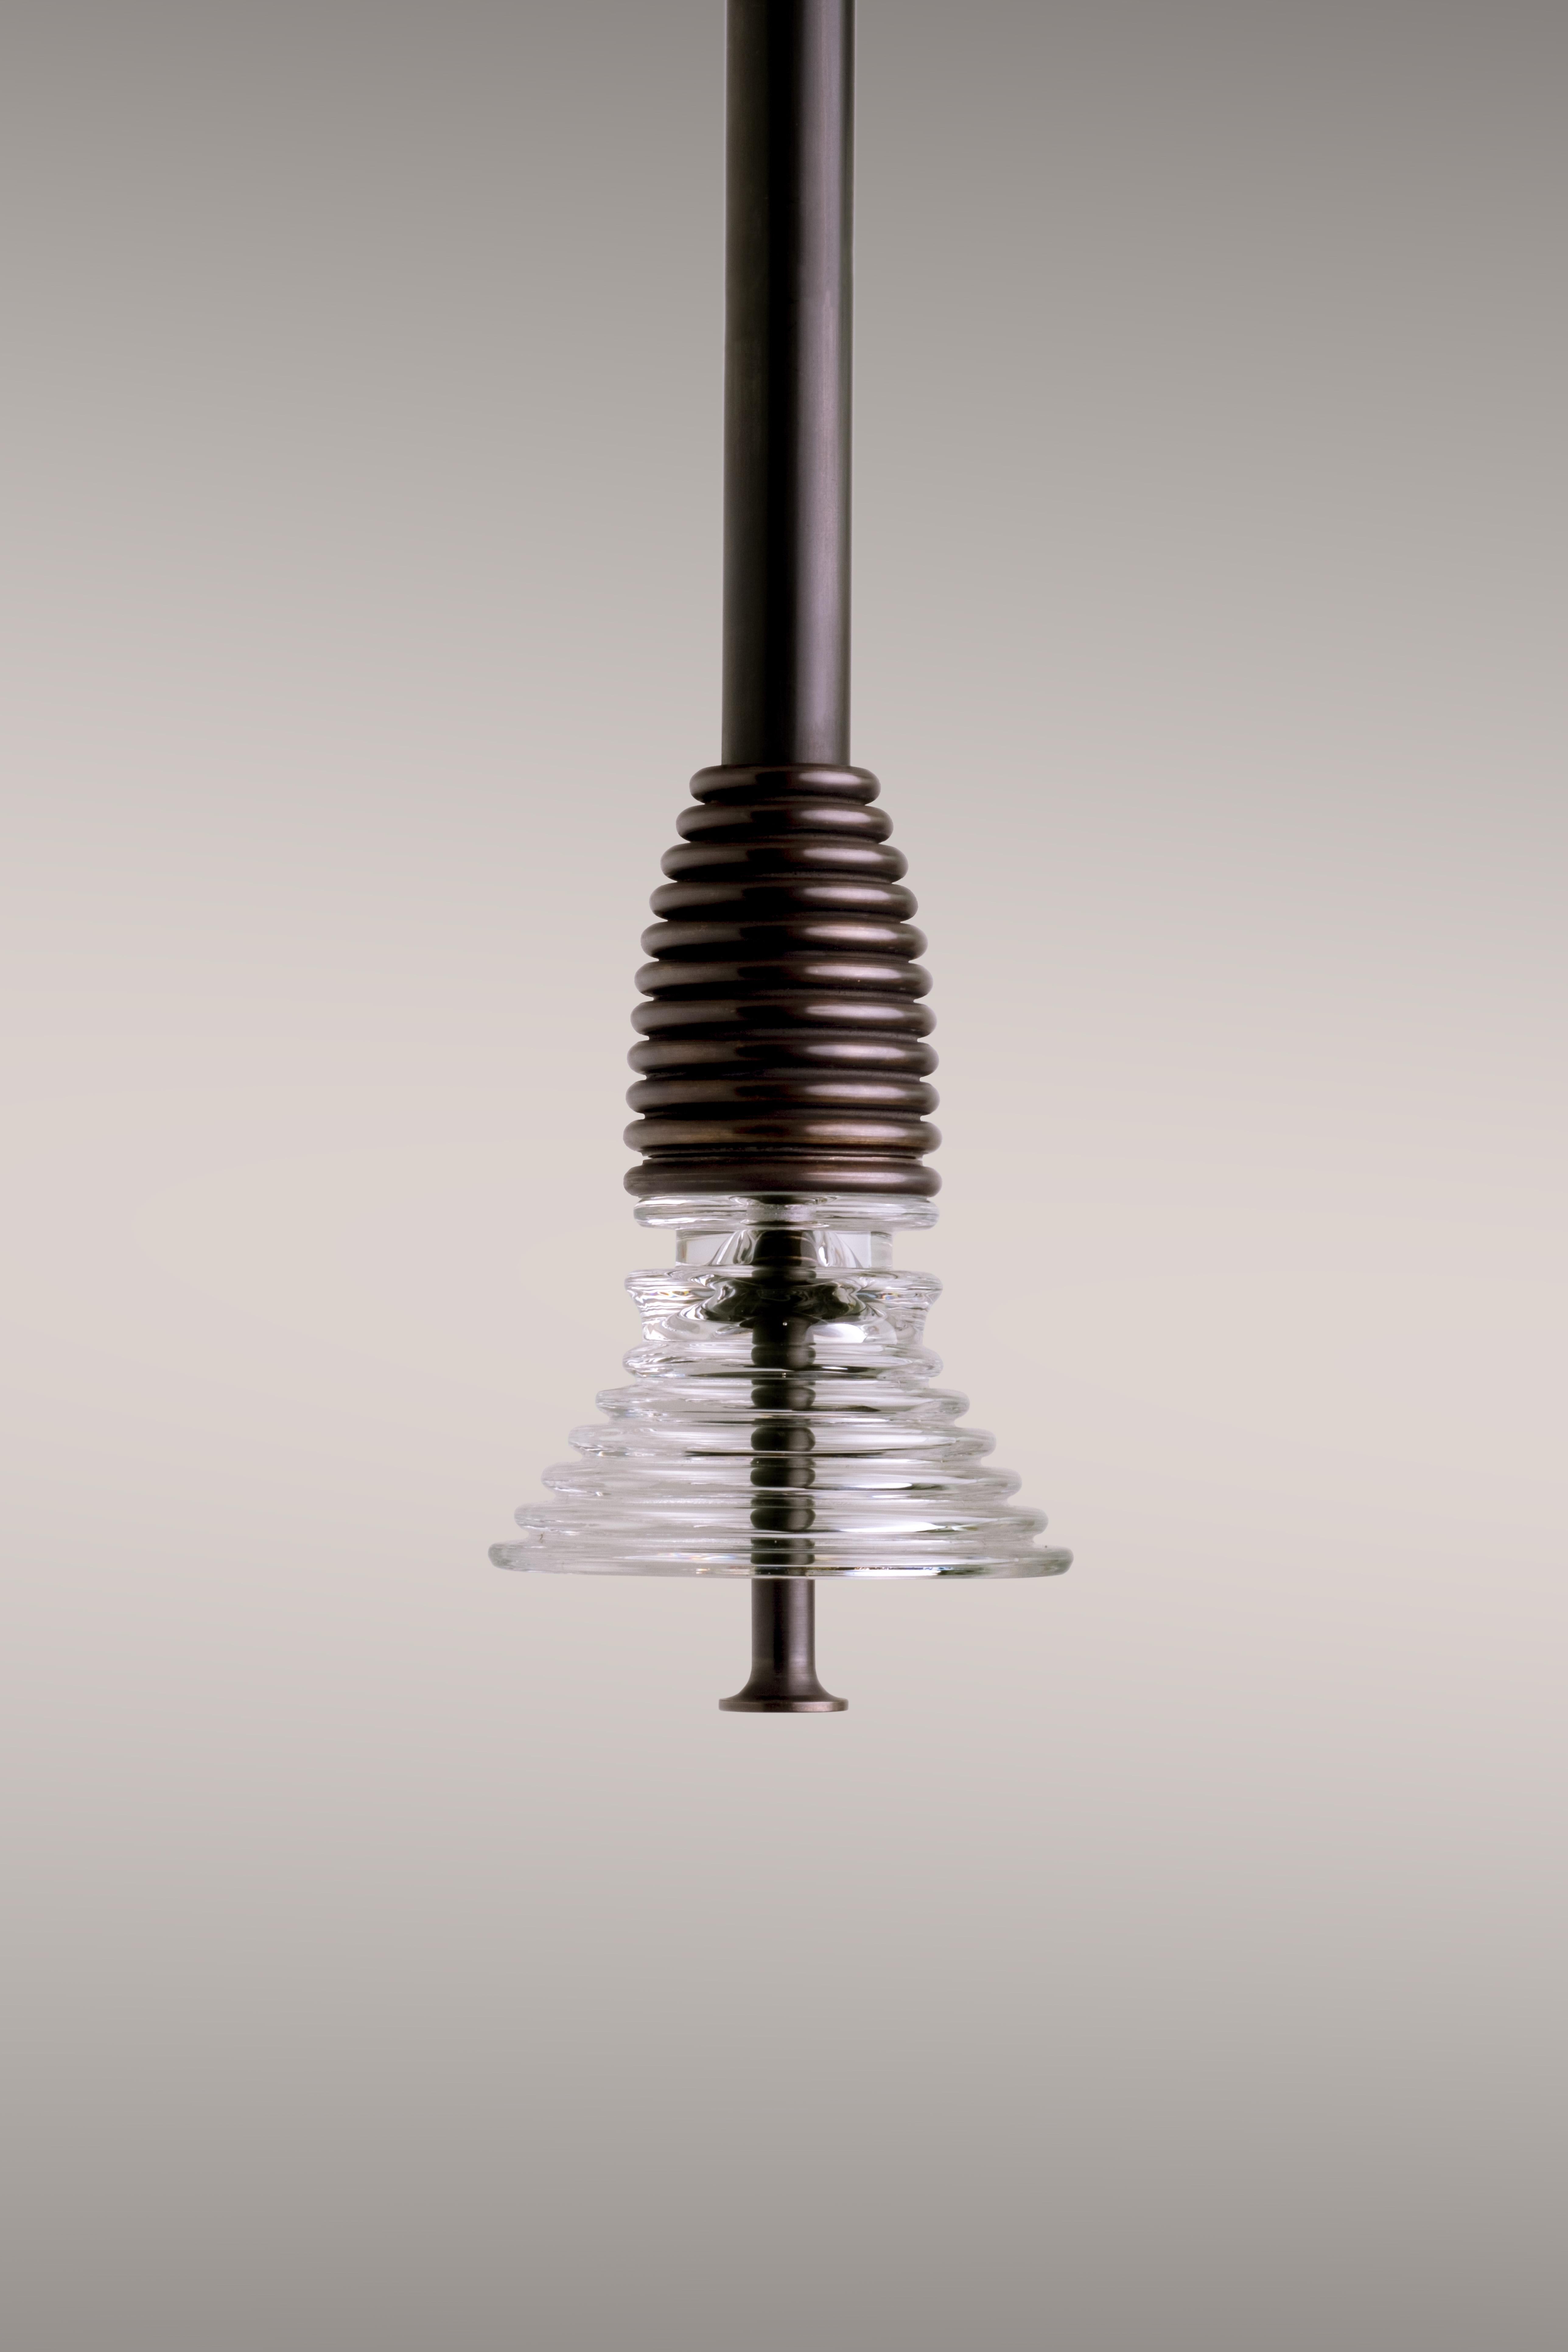 The Insulator 'A' Pendant in dark brass and clear glass by NOVOCASTRIAN deco For Sale 2